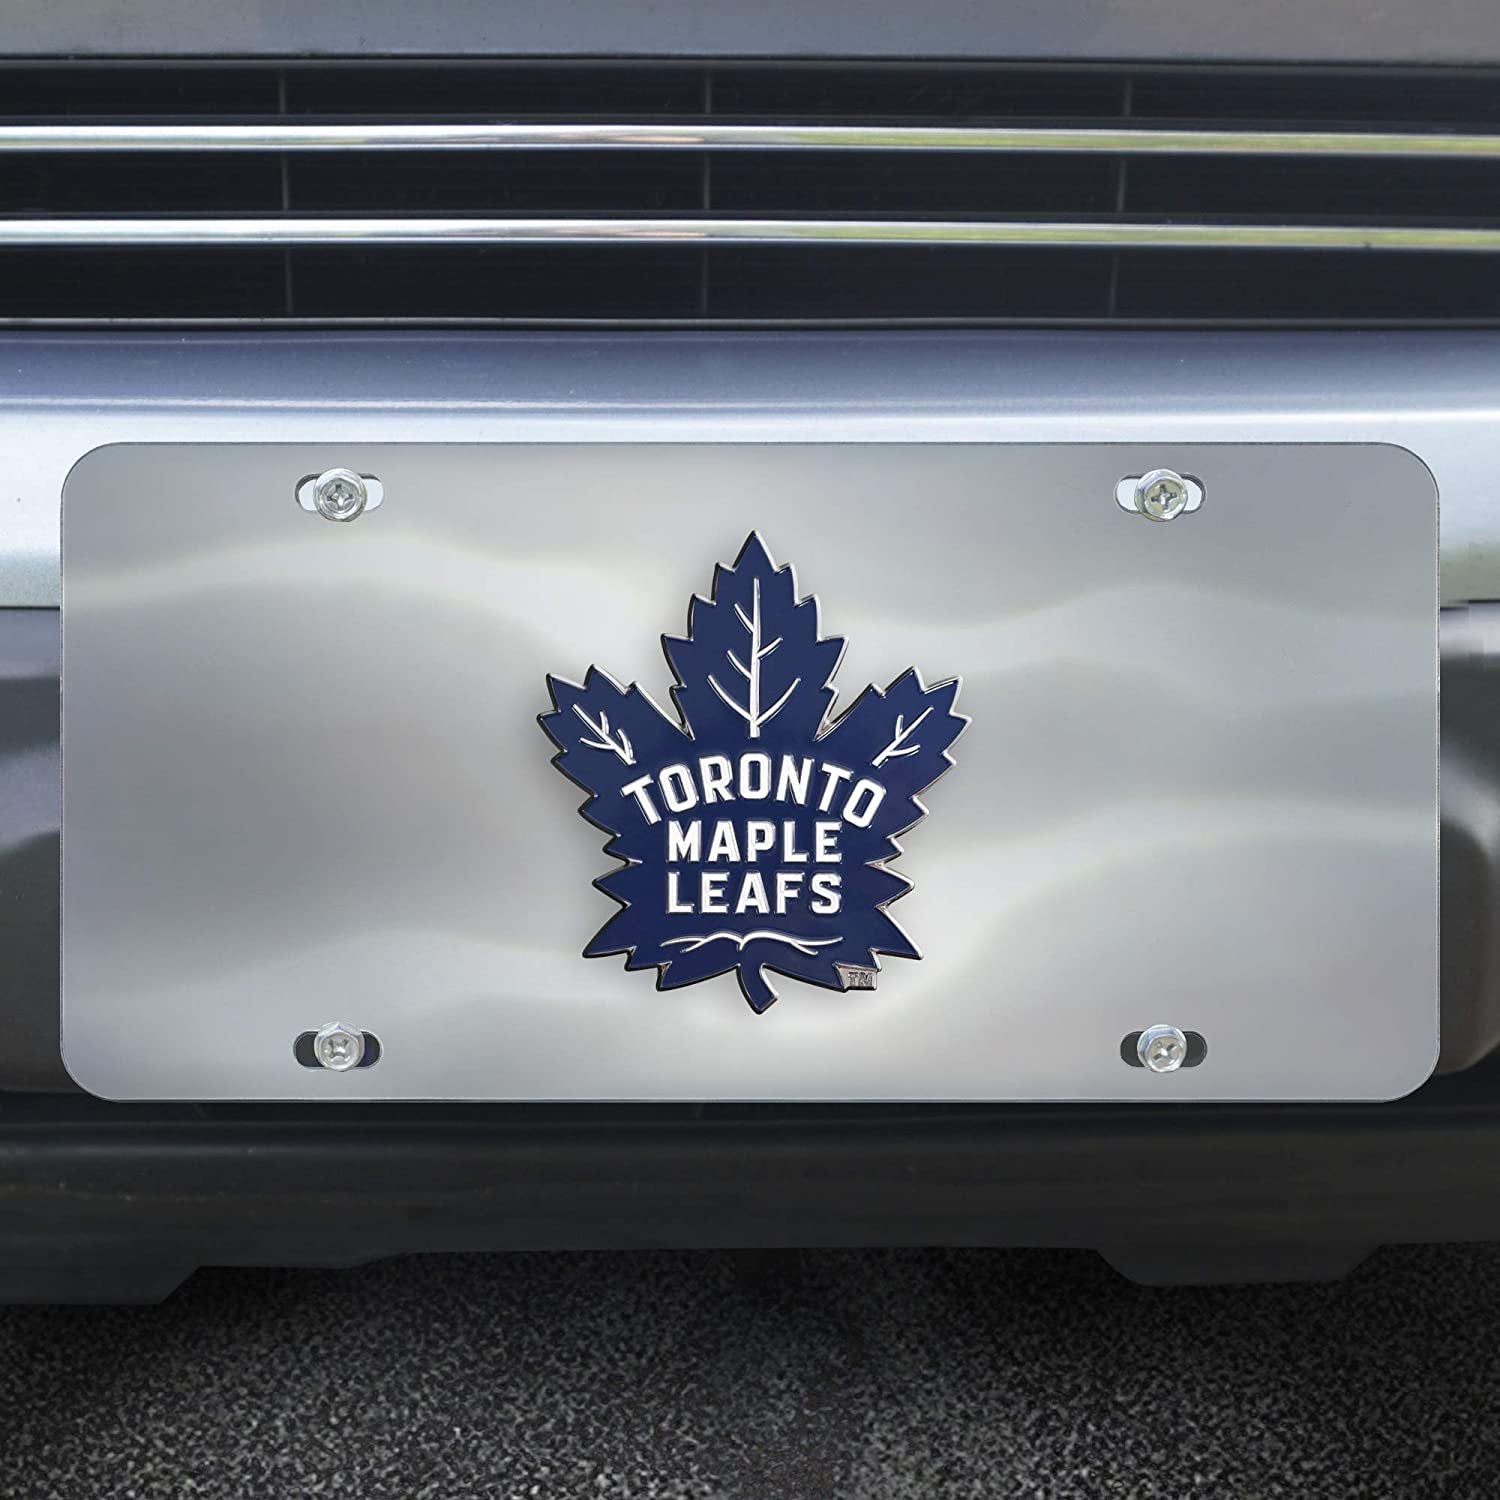 Toronto Maple Leafs License Plate Tag, Premium Stainless Steel Diecast, Chrome, Raised Solid Metal Color Emblem, 6x12 Inch